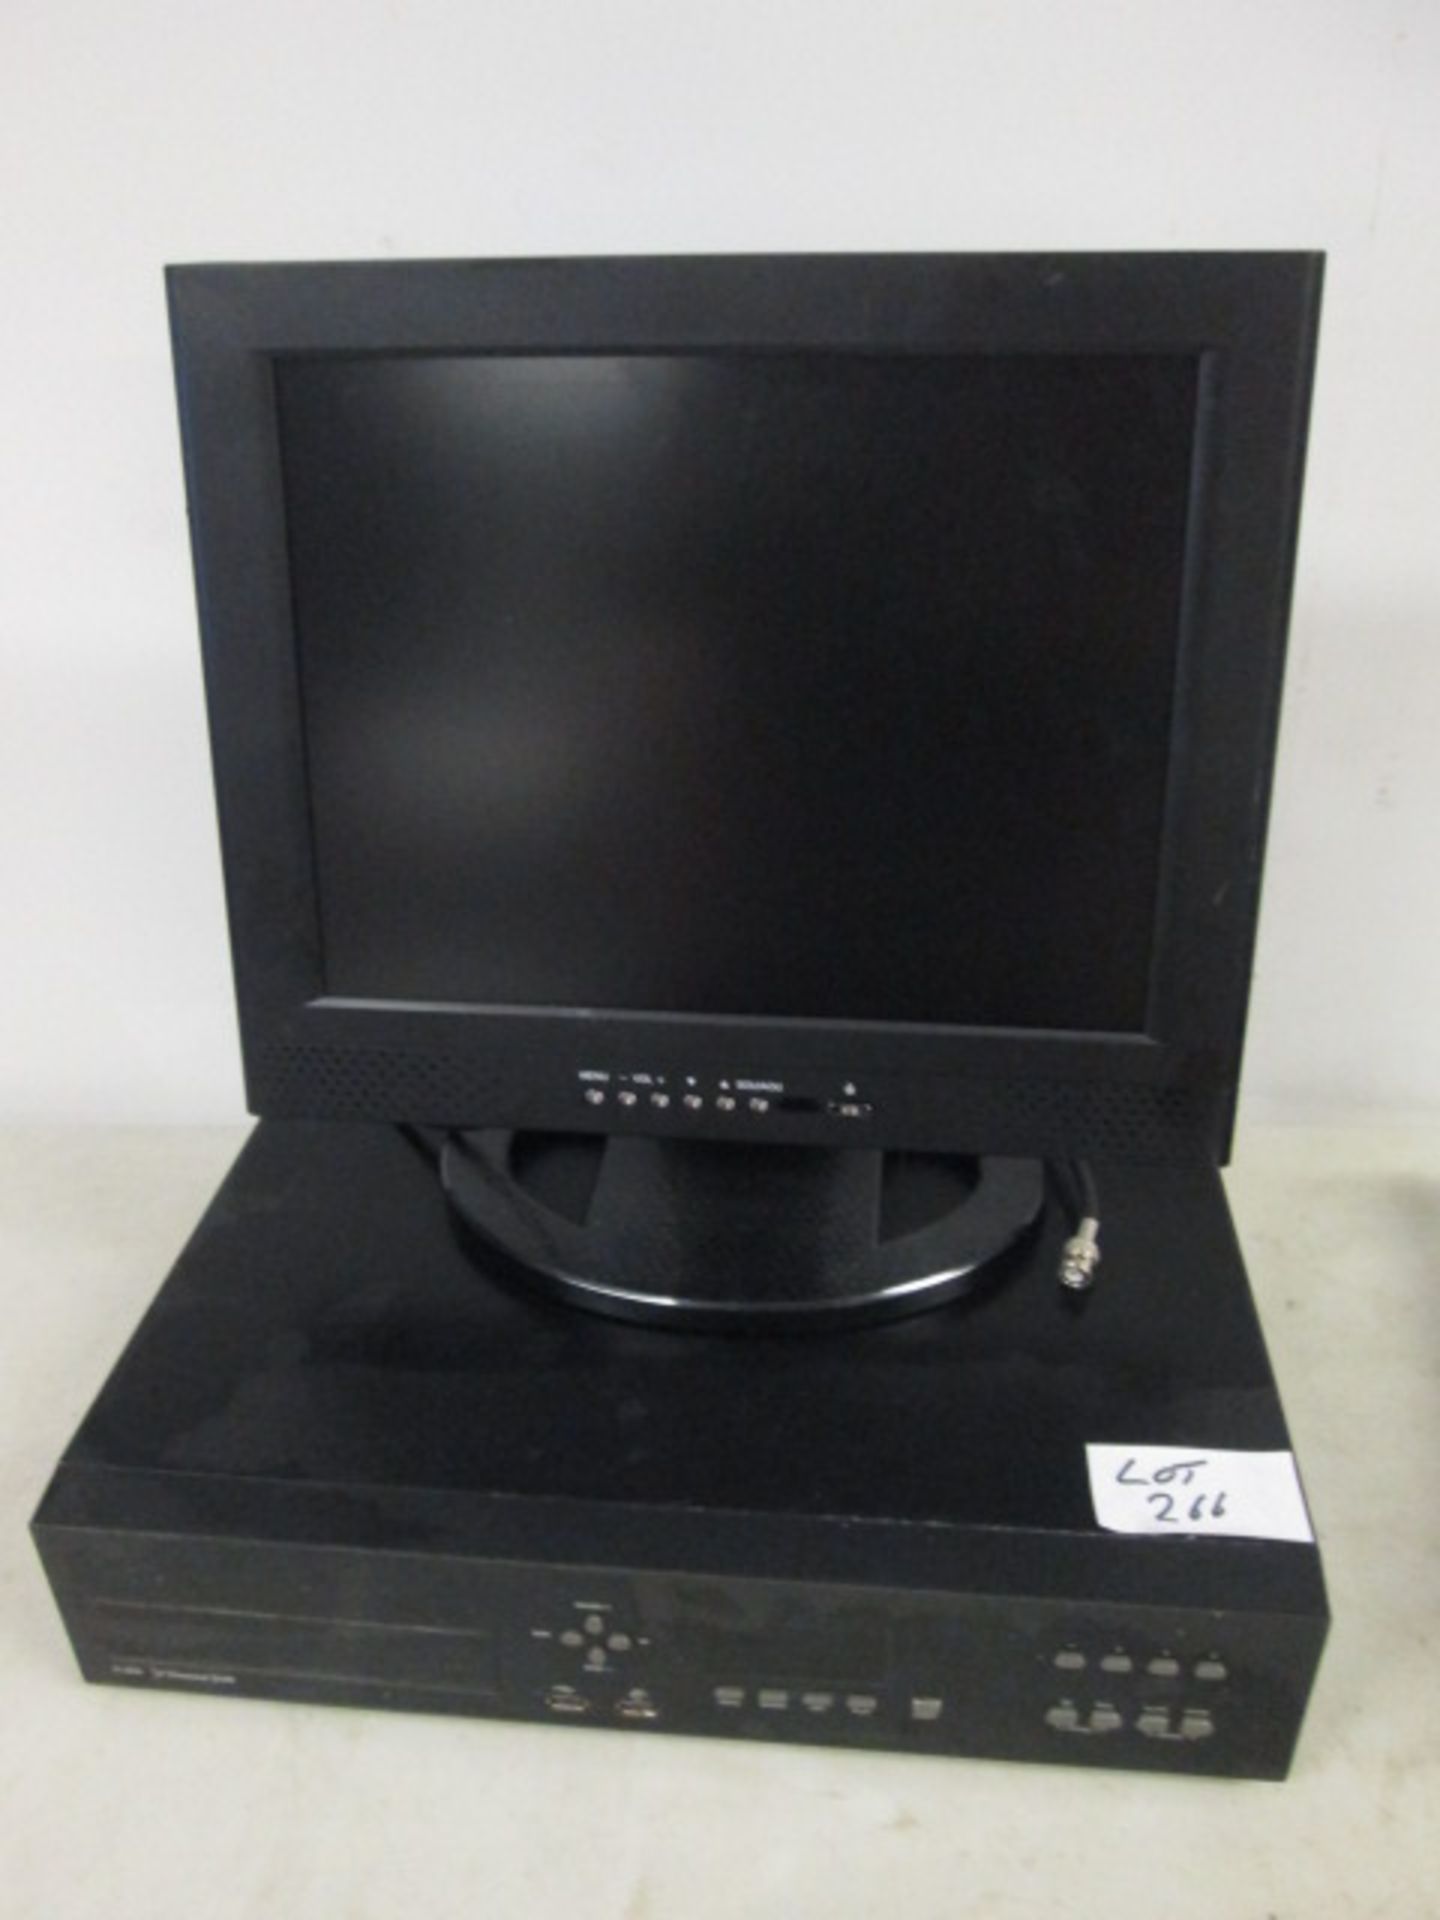 2 x H.264 4 Channel DVR & 2 x VSII CCTV Monitor. No Power Supplies & Unable to Power Up. No VAT on - Image 2 of 4